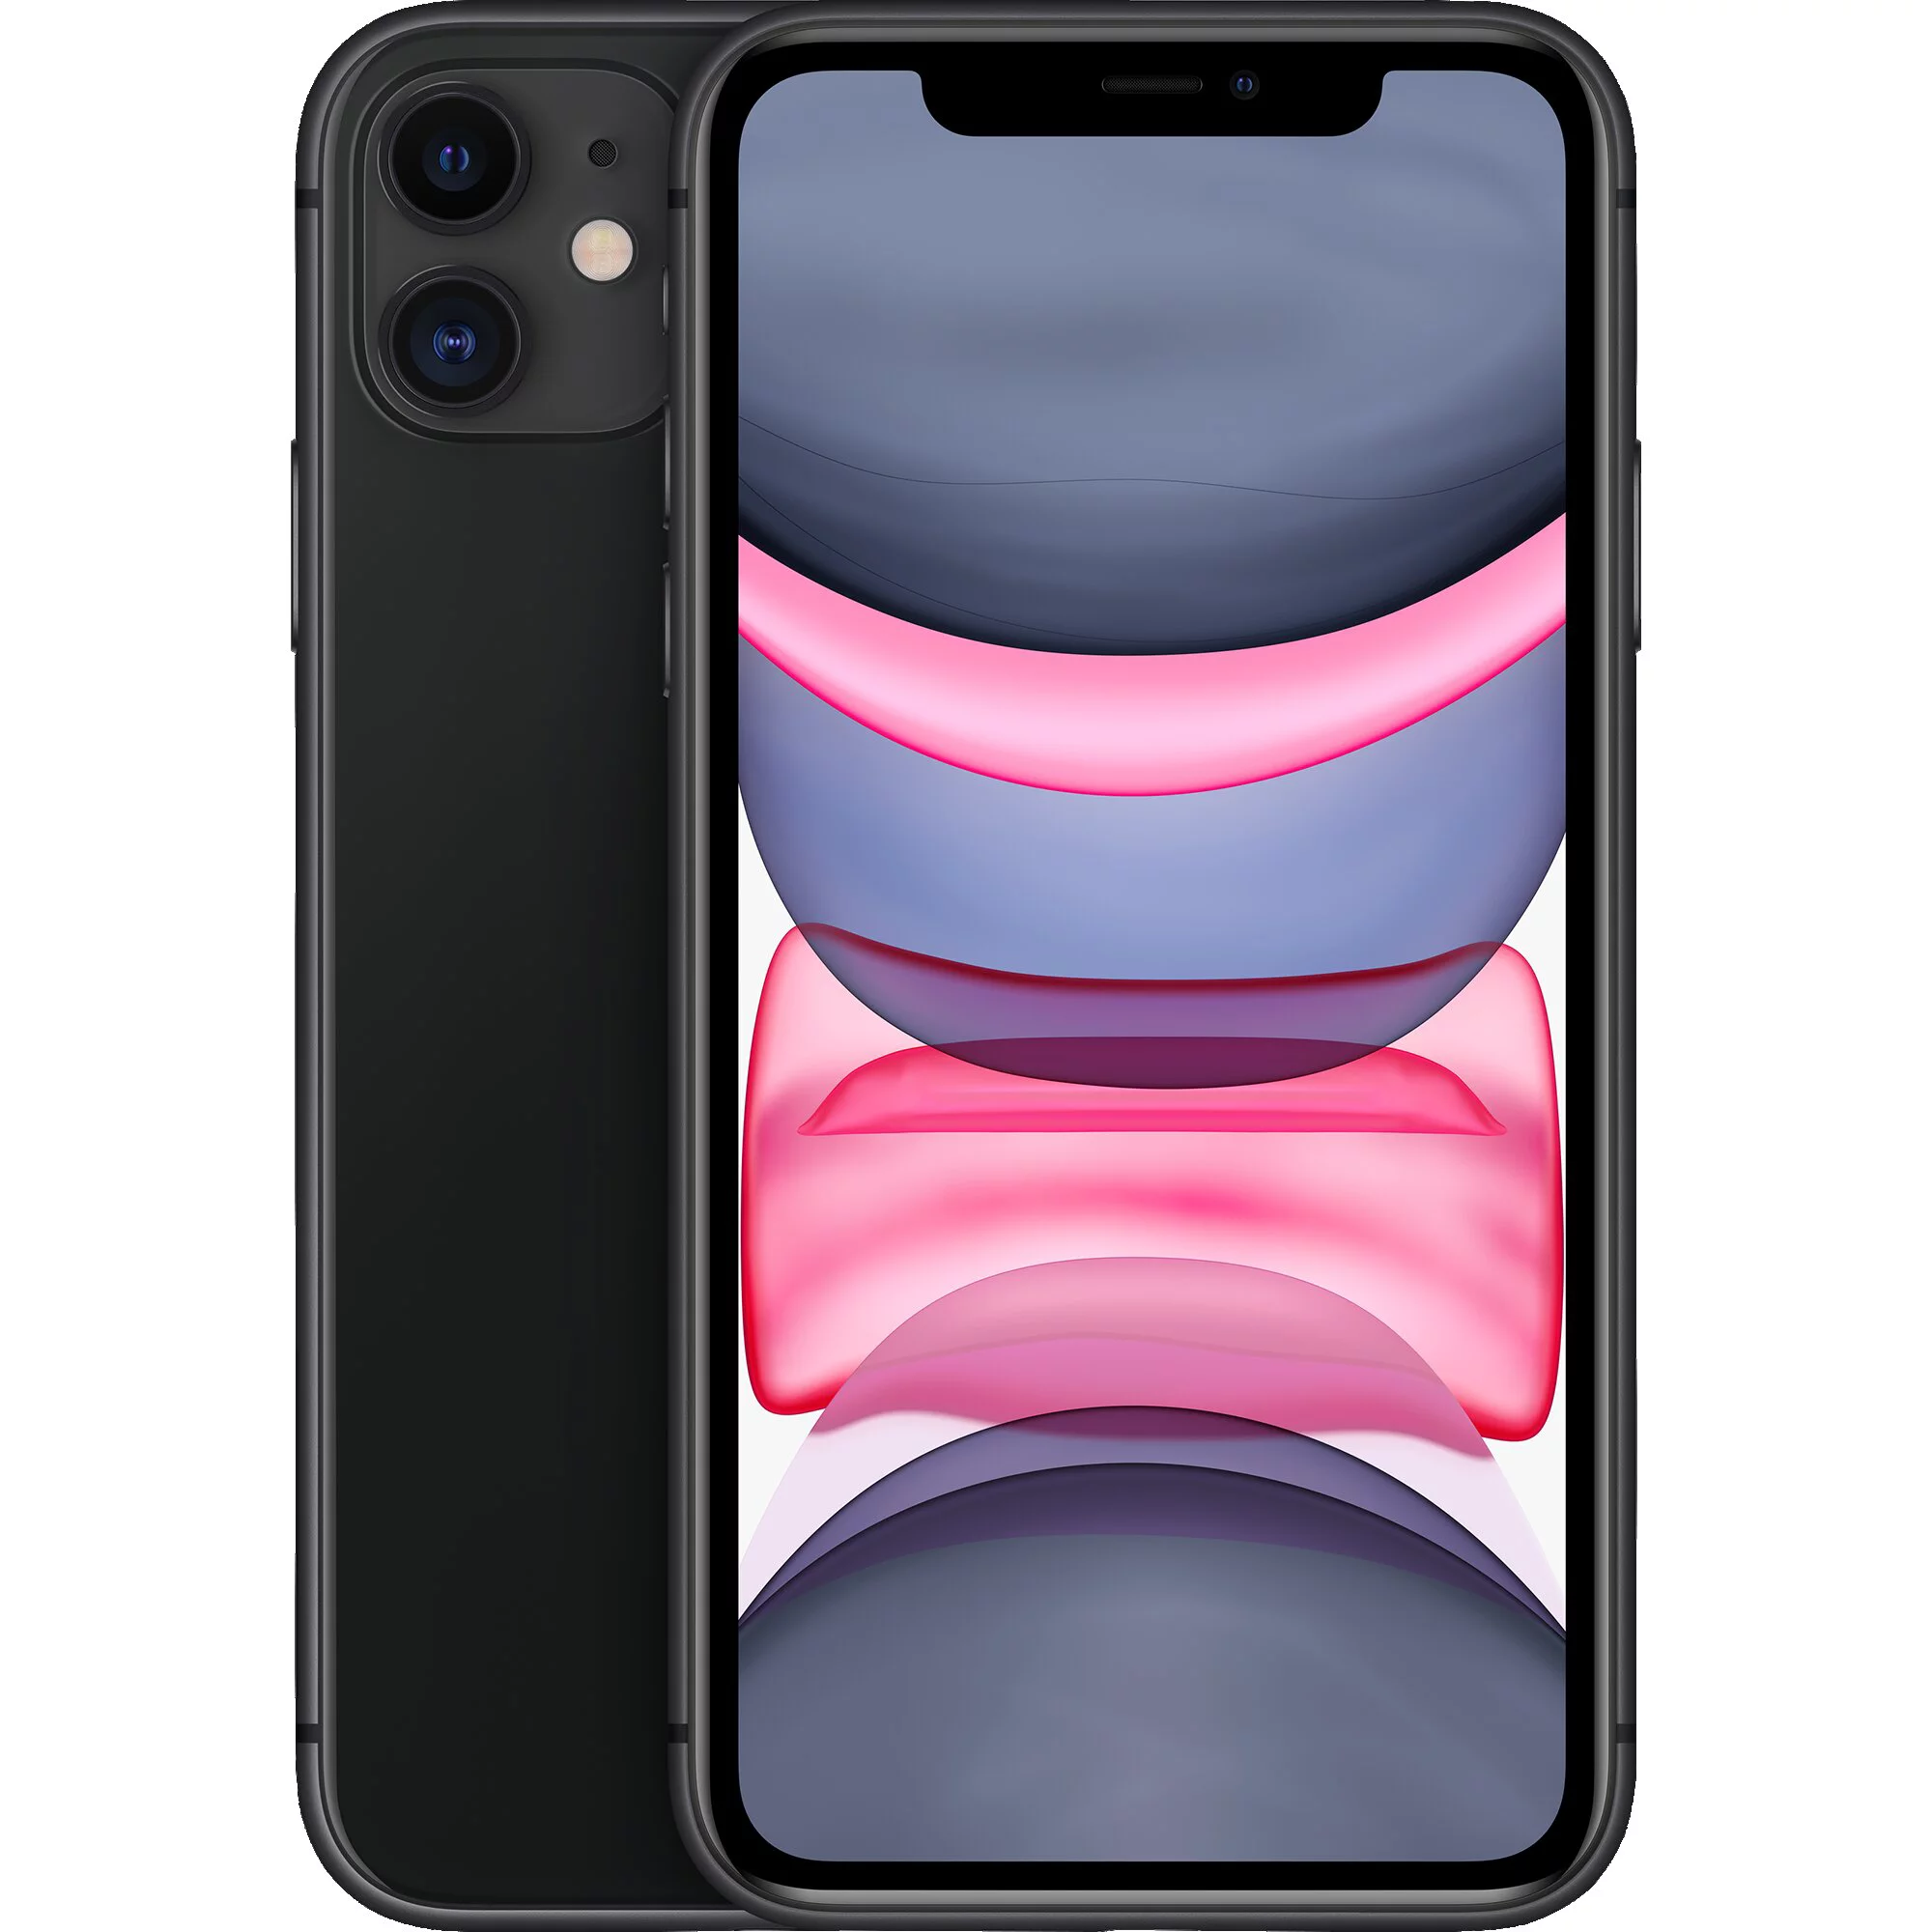 DX Offers Mall Family Mobile Apple iPhone 11 Prepaid with 64GB